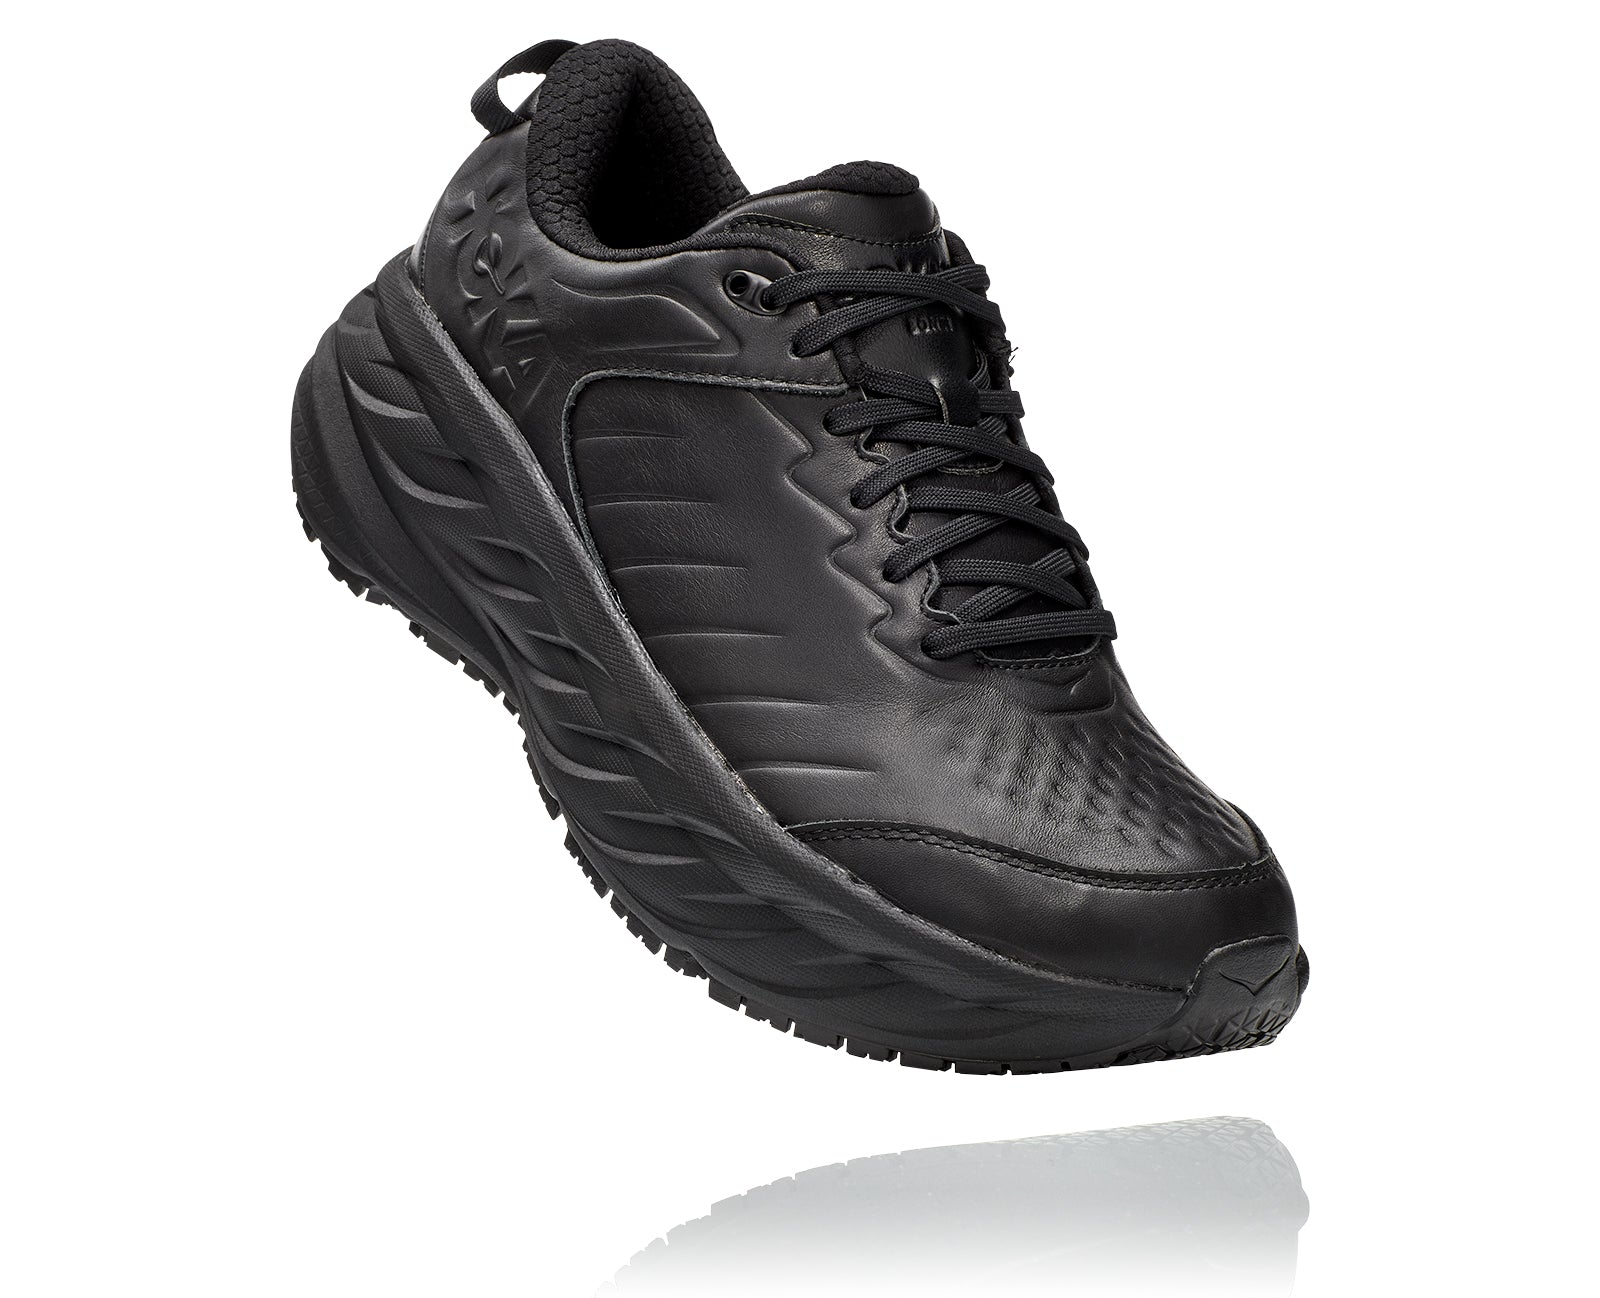 The Men's Hoka Bondi SR features a water-resistant leather upper along with a slip-resistant outsole. Ever features of the Hoka Bondi SR is designed to create all day comfort. 